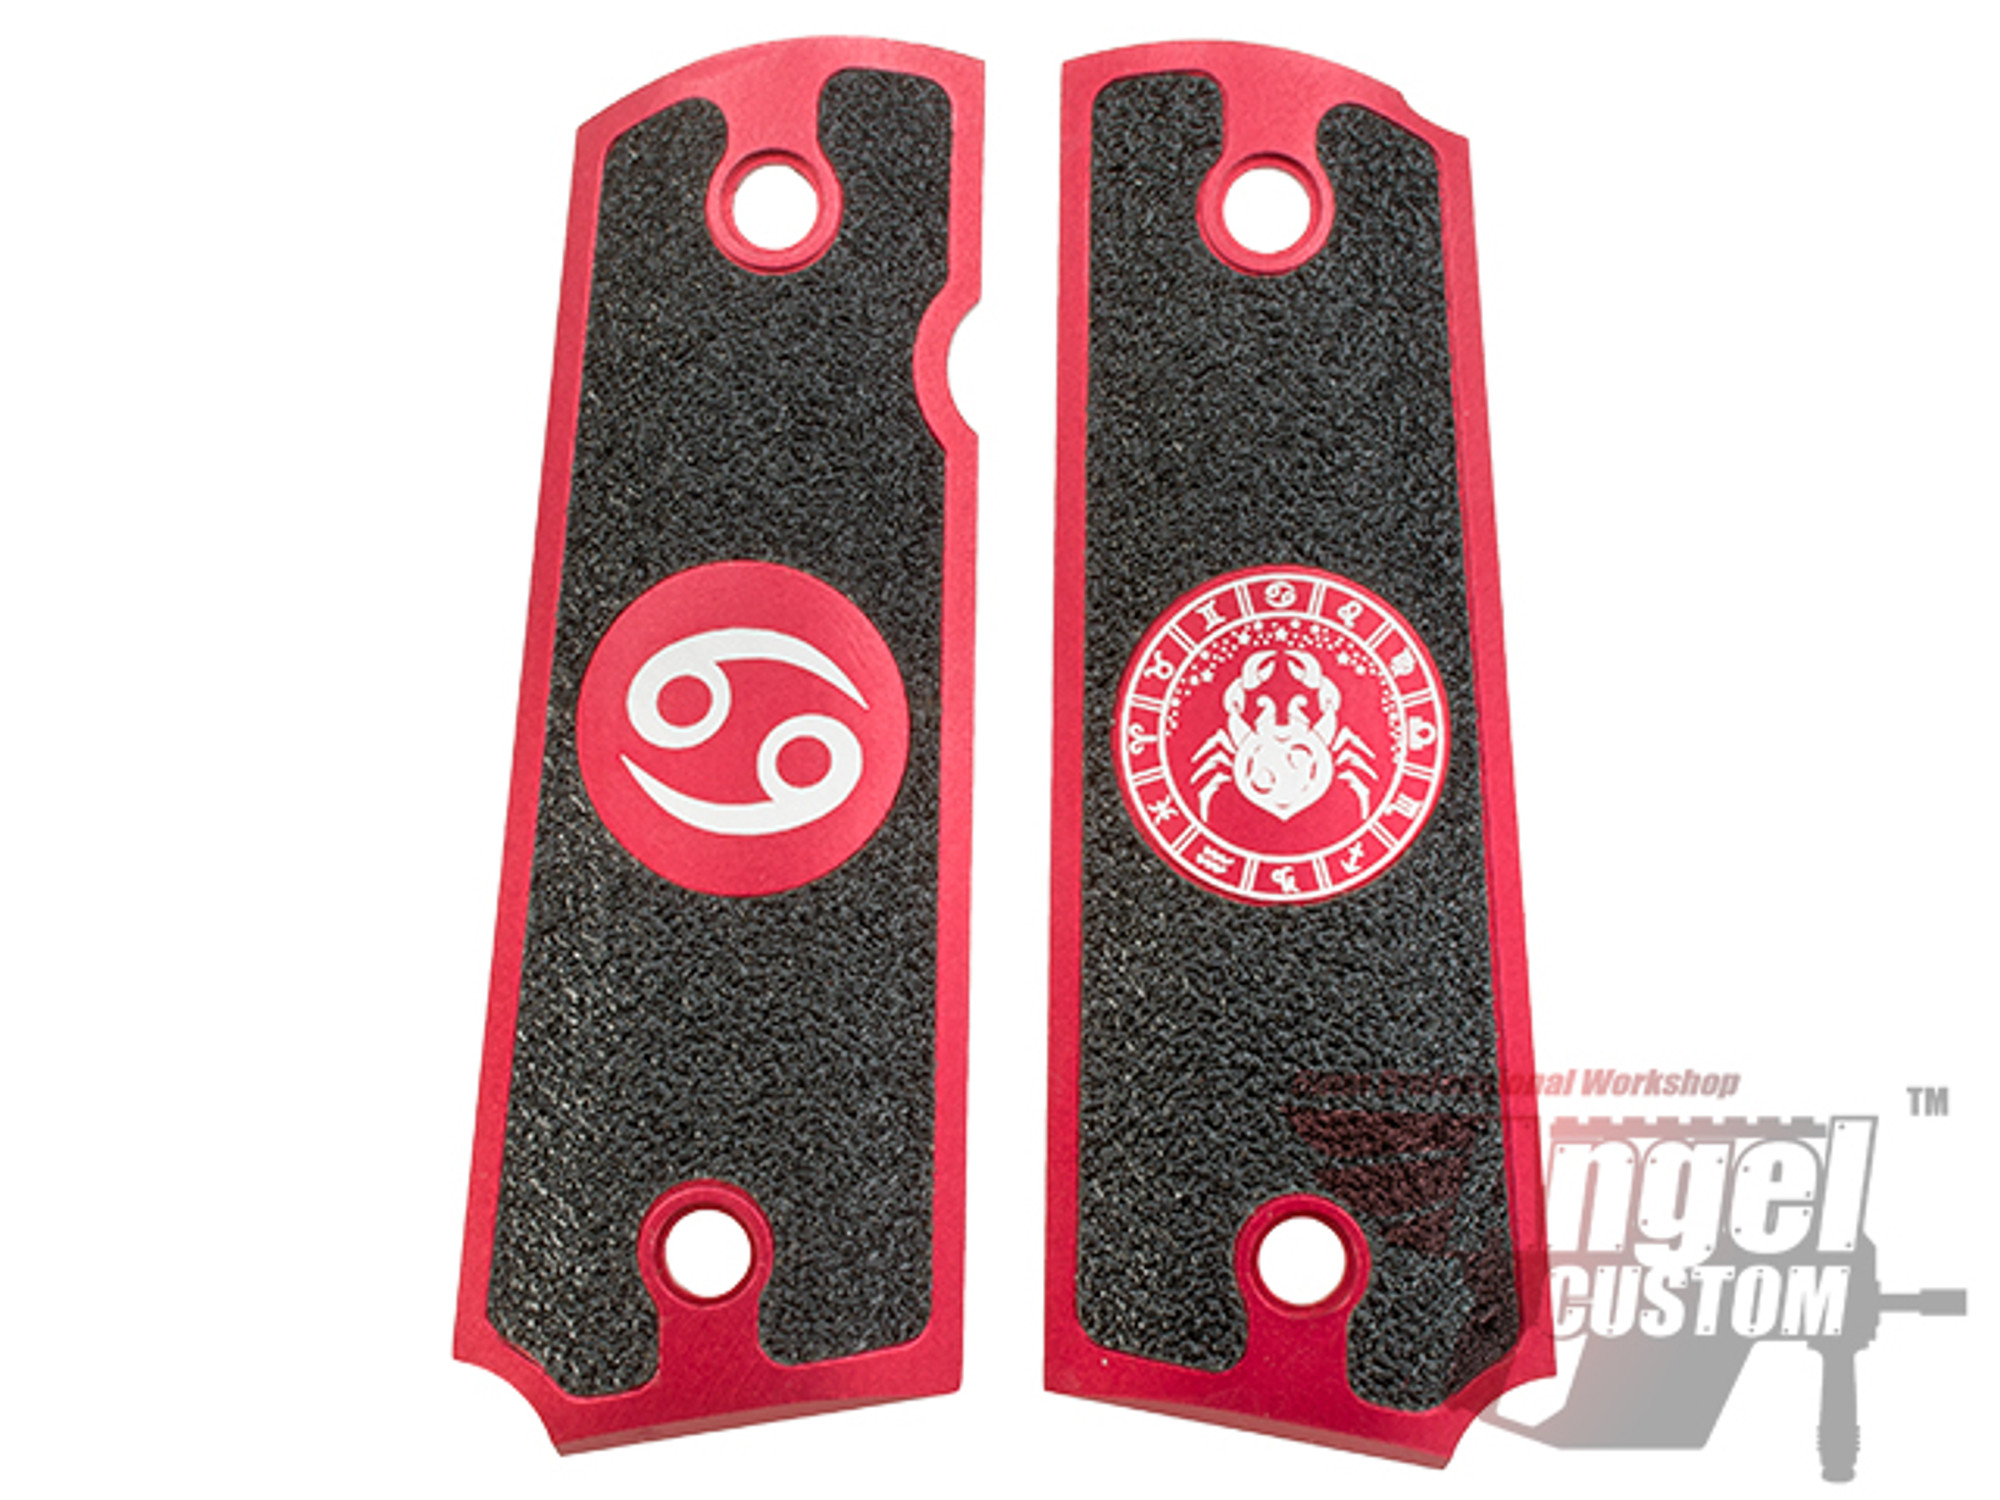 Angel Custom CNC Machined Tac-Glove "Zodiac" Grips for Tokyo Marui/KWA/Western Arms 1911 Series Airsoft Pistols - Red (Sign: Cancer)